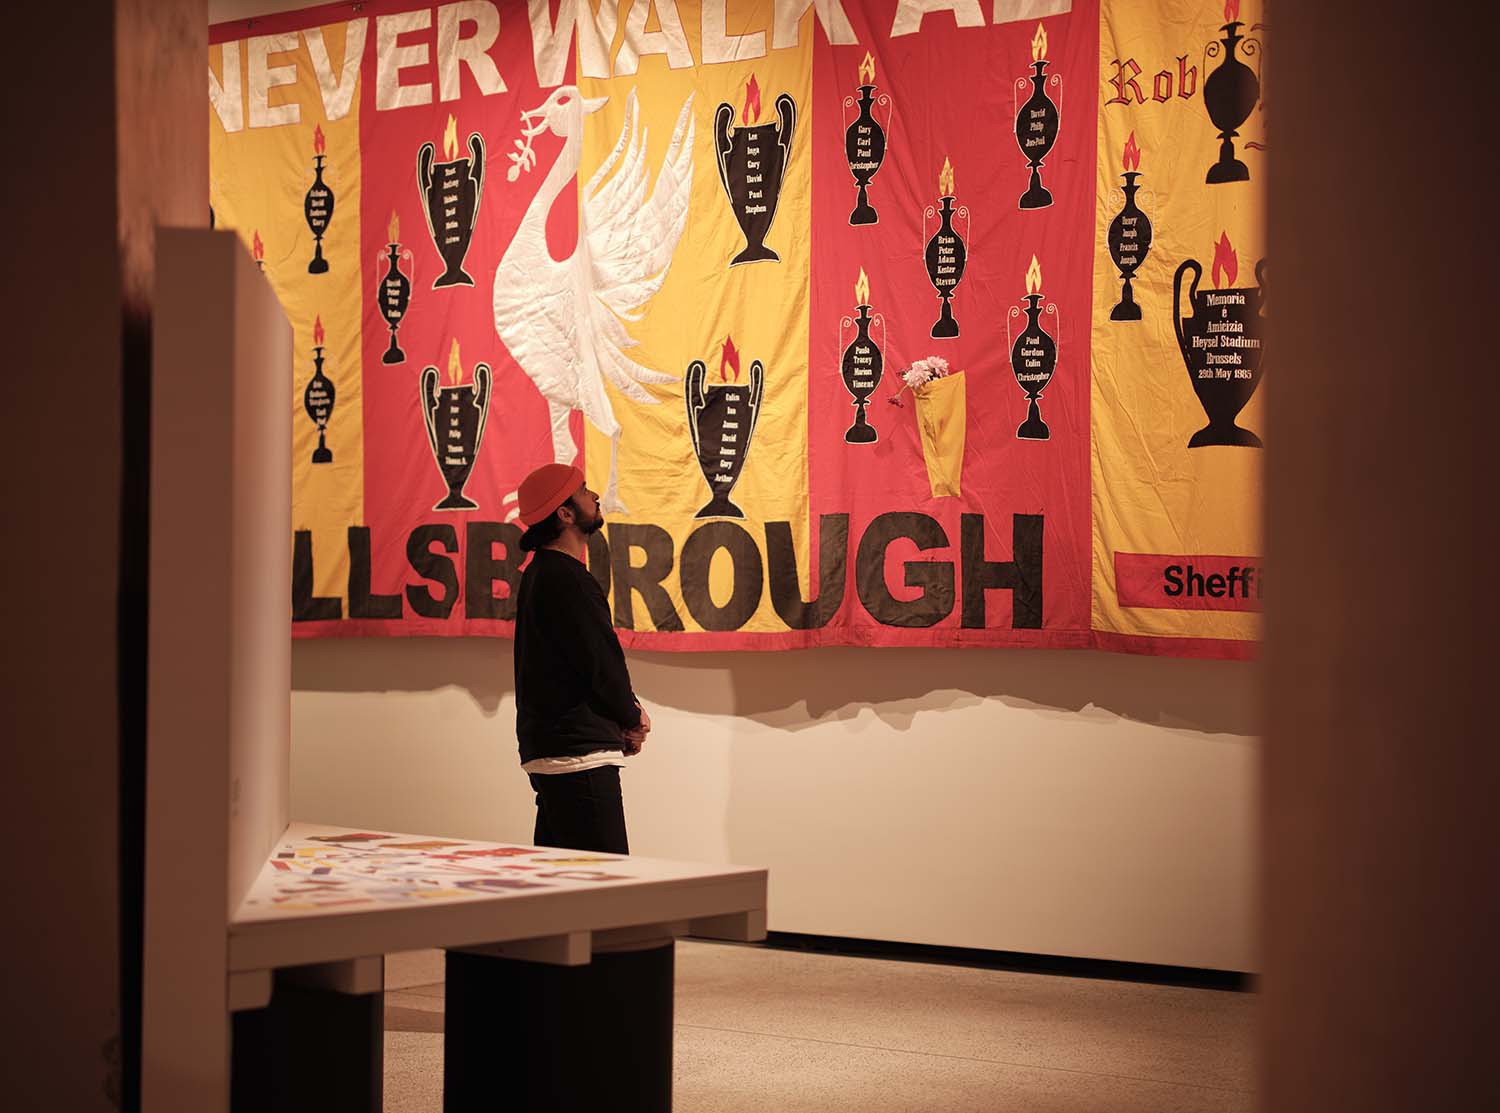 Hillsborough memorial banner by Peter Carney and Christine Waygood — 2009